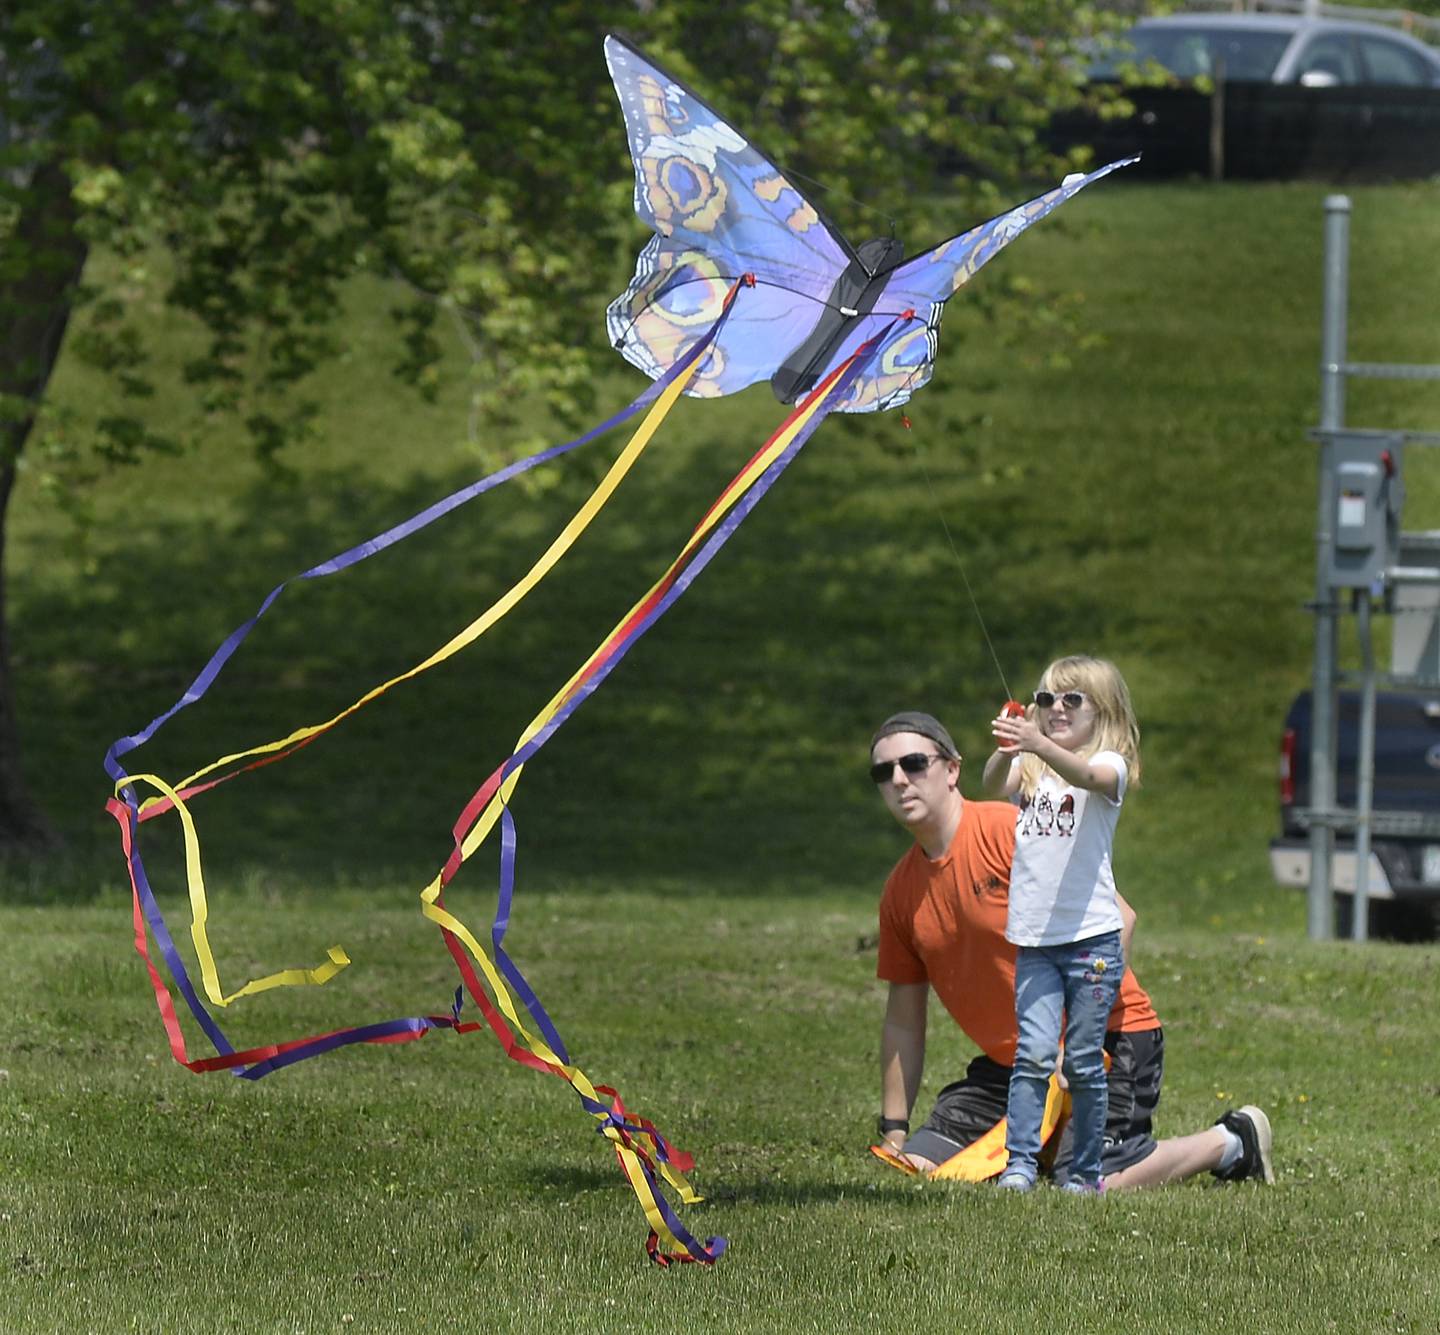 With a little help from her father Derek, Sophia Waite gets her kite in the air Saturday, May 20, 2023, during the Kites in Flight festival at Riverfront Park in Ottawa. Kite flying as well as other activities took place Saturday and Sunday.